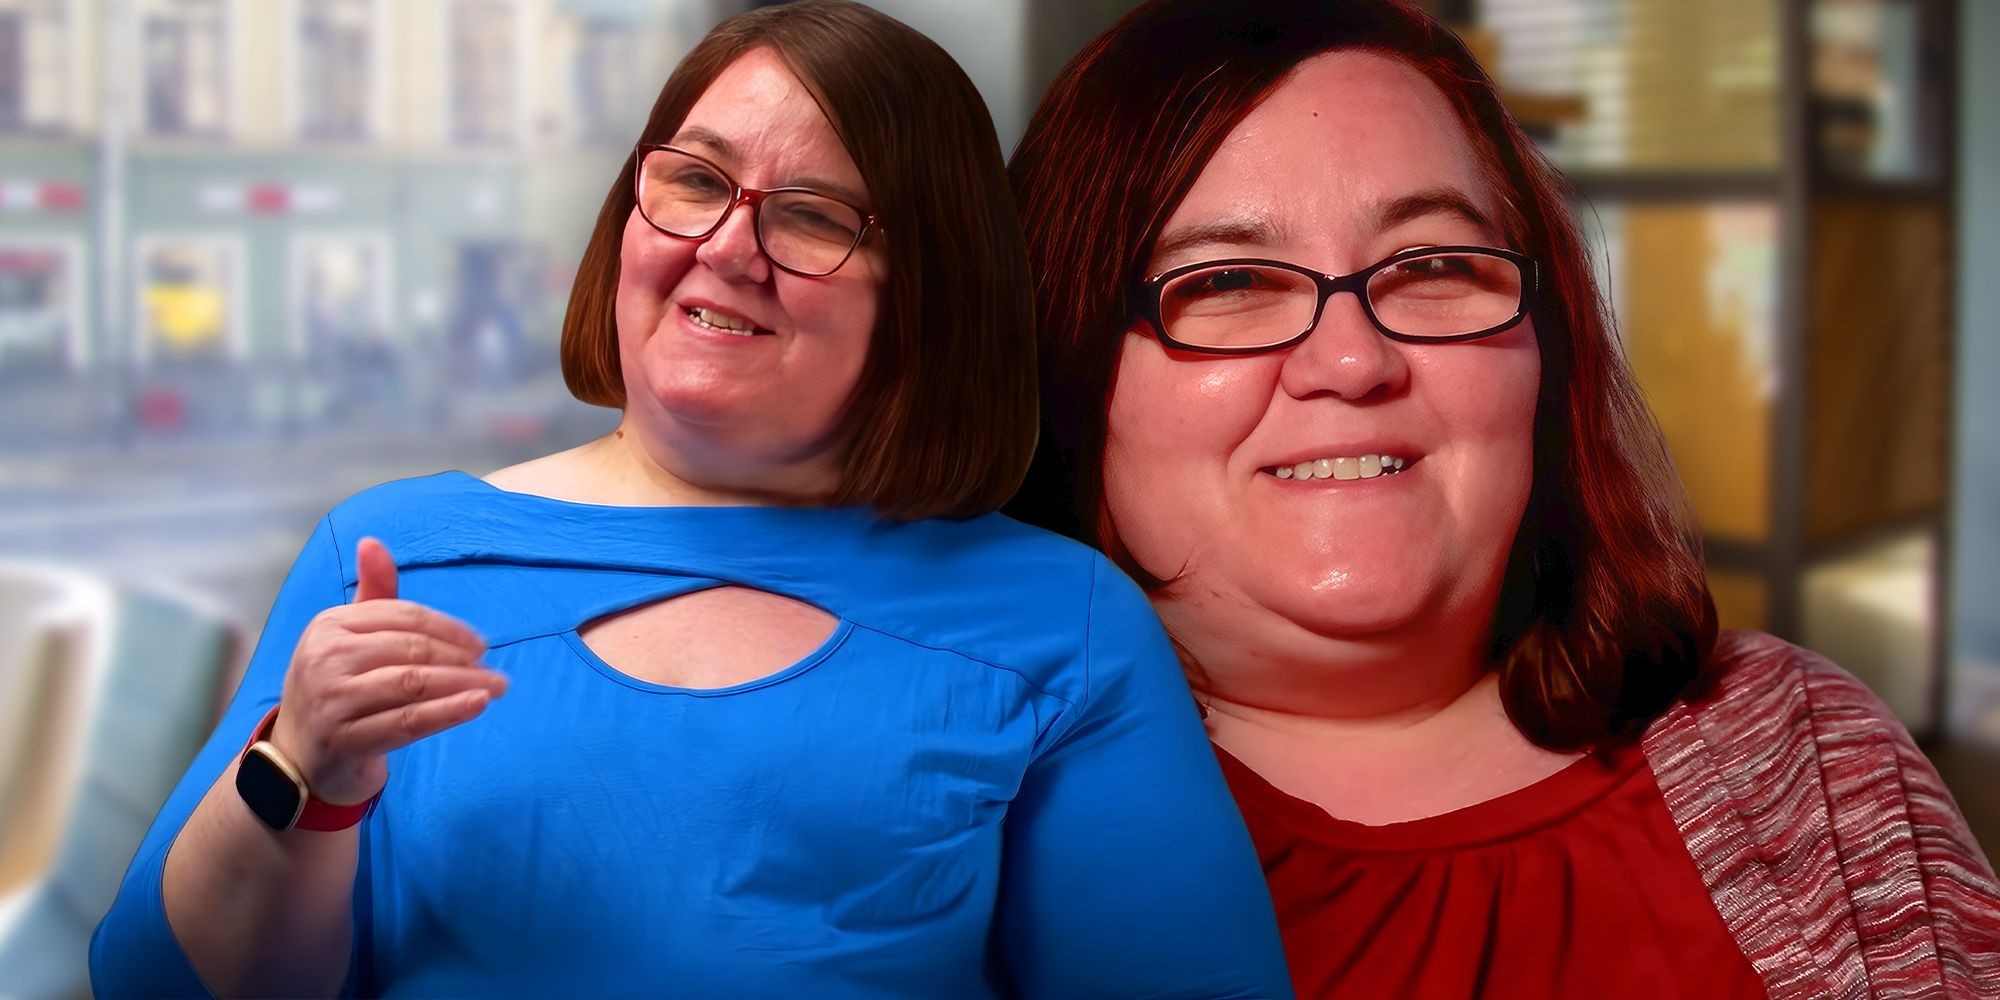 Danielle Mullins from 90 Day Fiancé montage blue and burgundy tops smiling